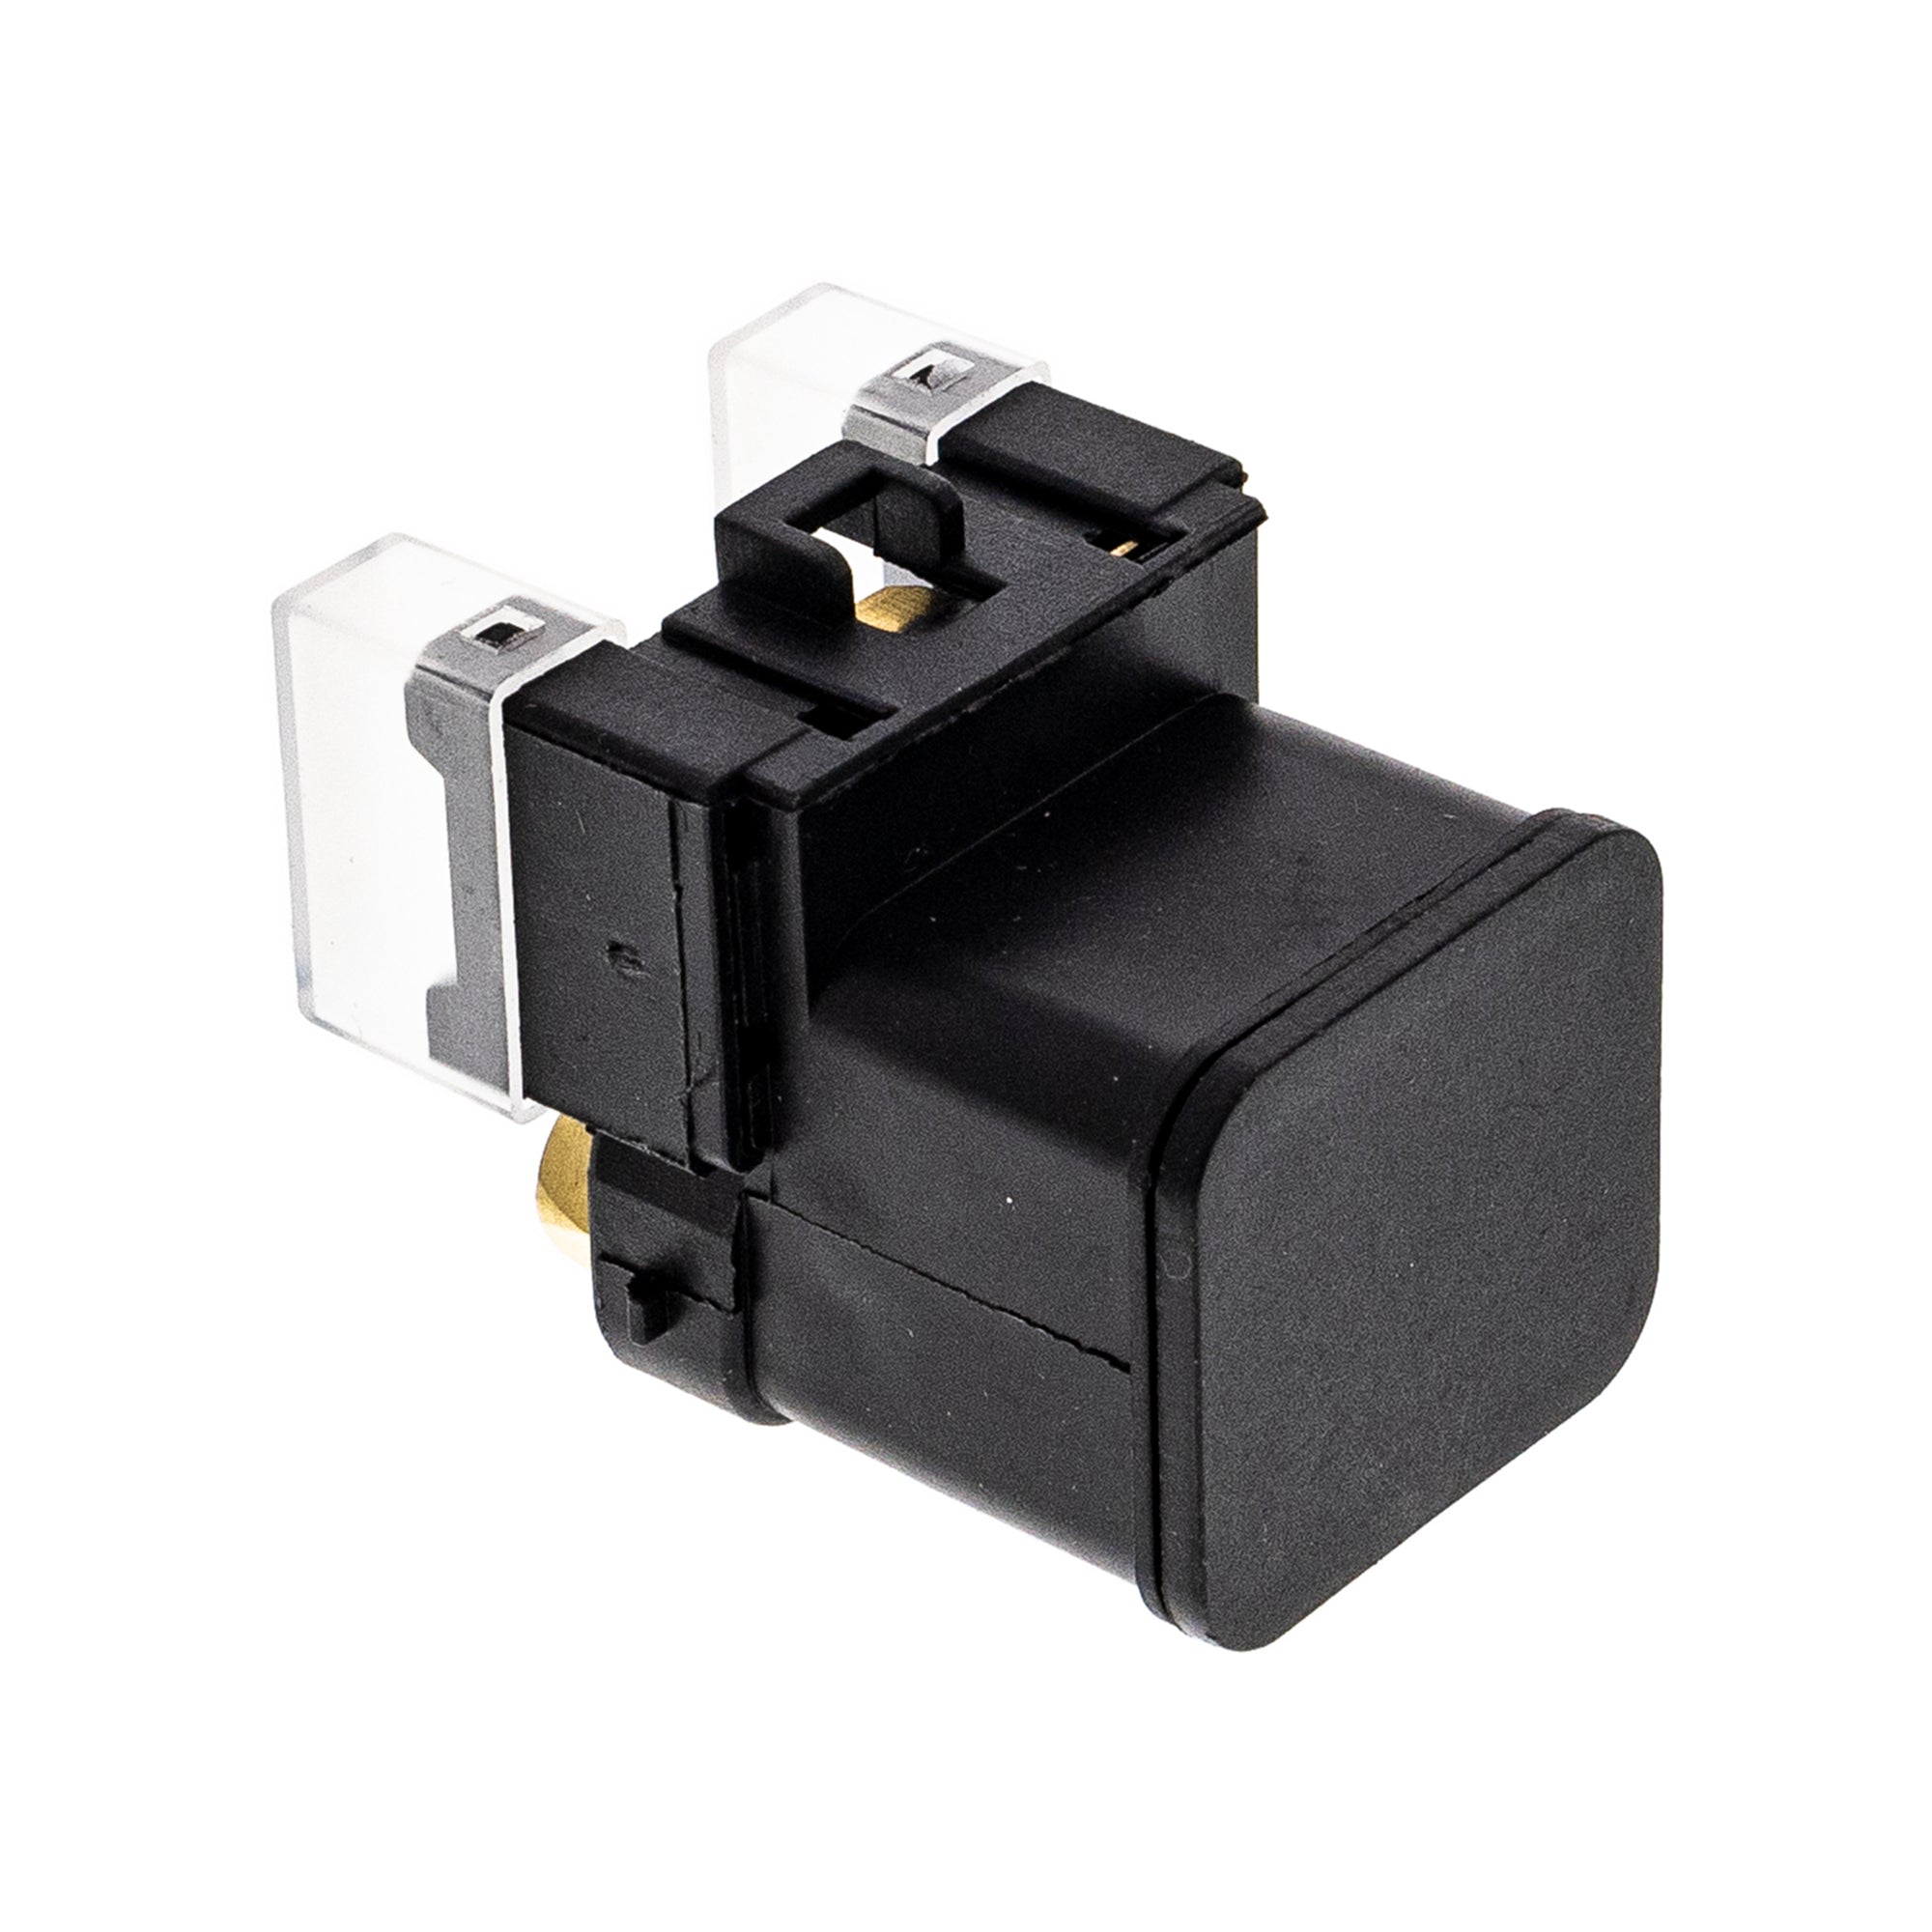 Starter Solenoid Relay Switch for Yamaha 5TJ-81940-12 WR250F WR450F